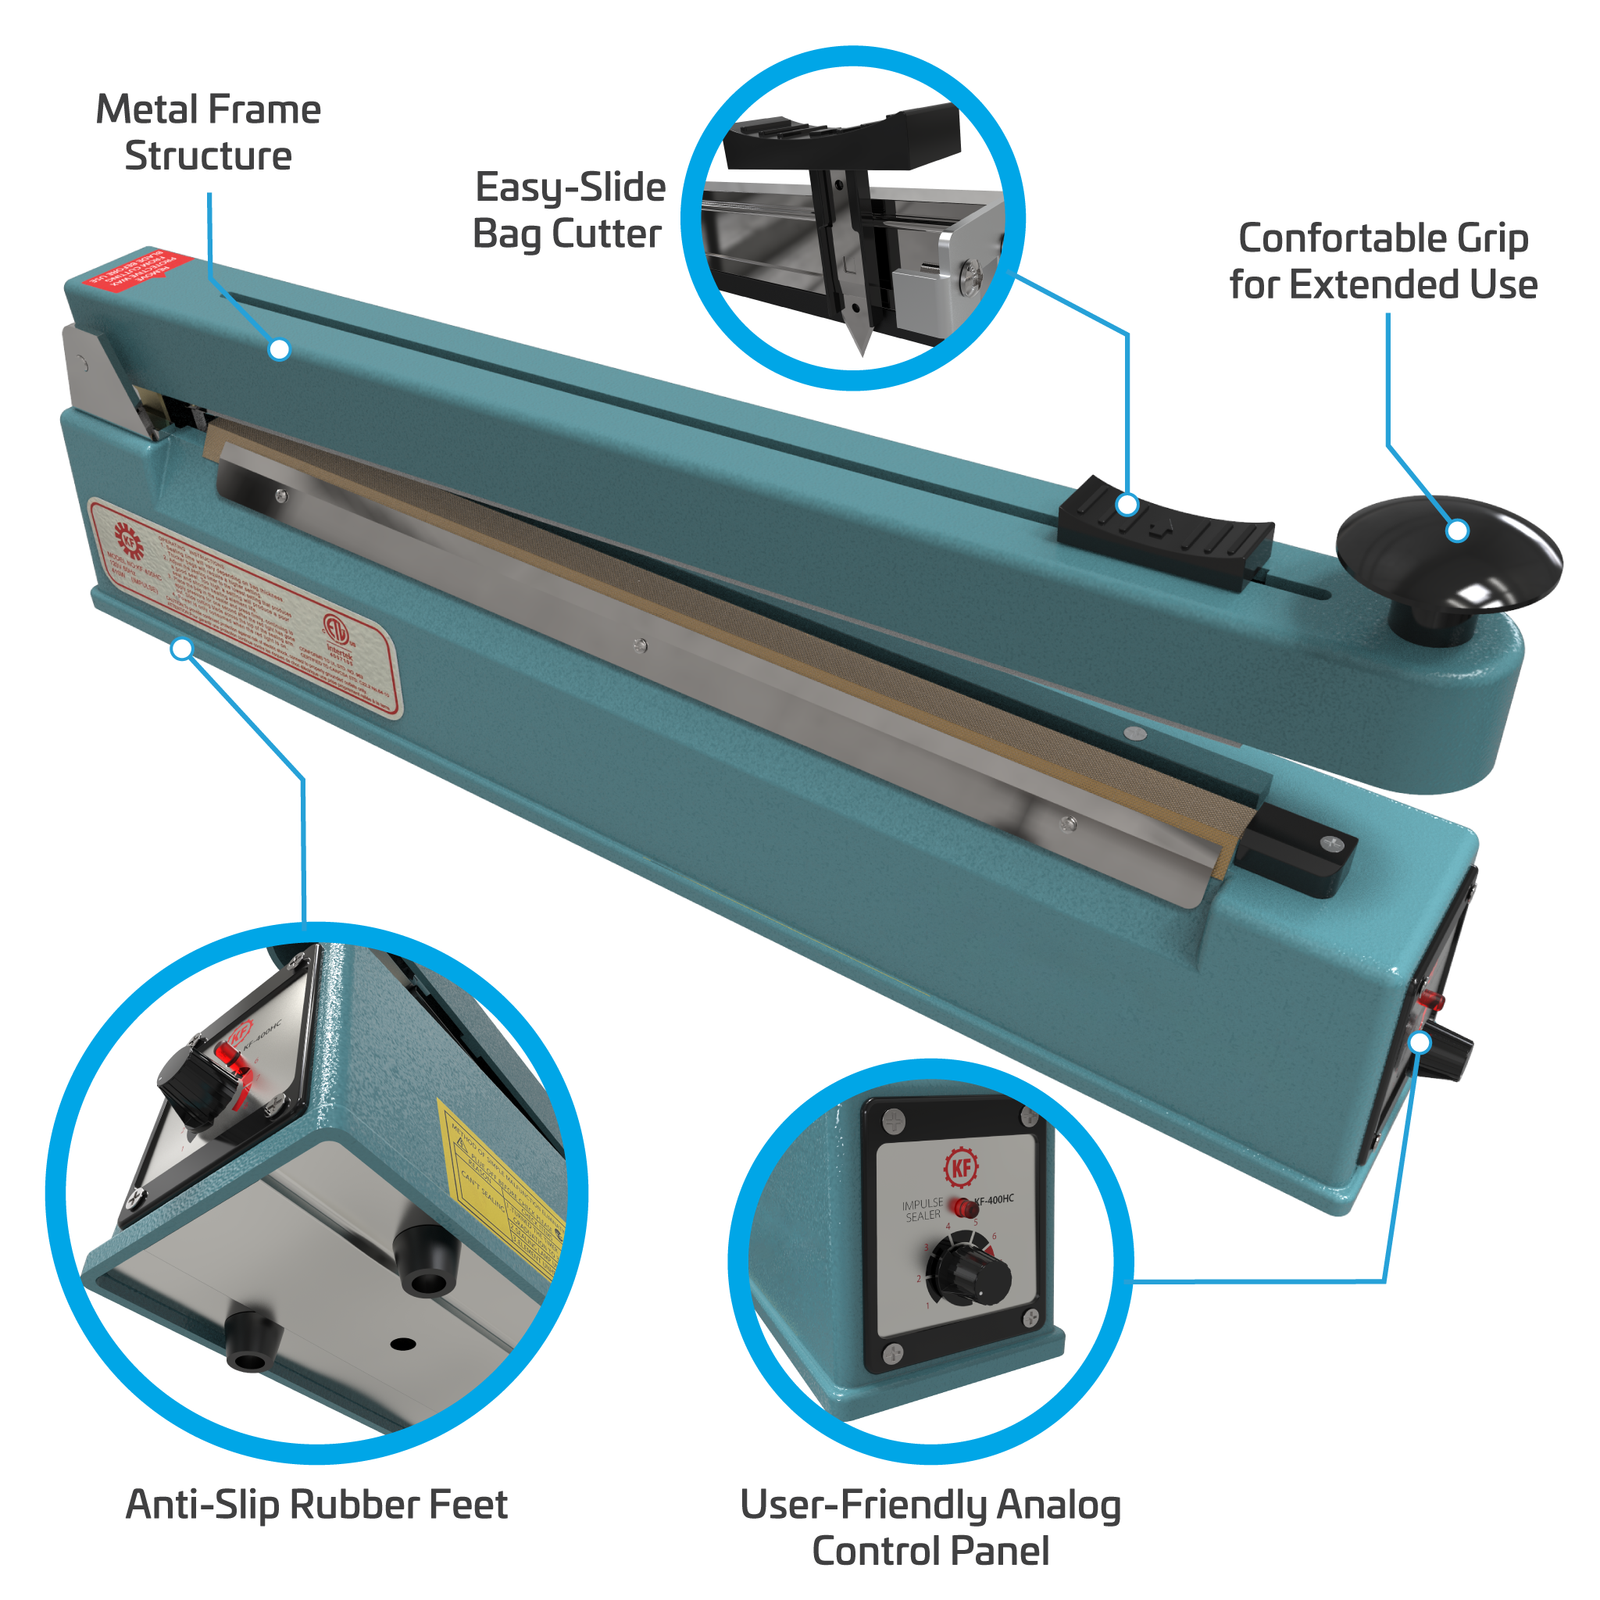 Infographic shows blue manual impulse sealer. Highlighted features include, Metal Frame Structure, Easy-slide bag cutter, Comfortable Grip for Extended Use, Anti-slip Rubber Feet, and User Friendly Analog Control Panel. Zoom in show close-ups of rubber feet and control panel